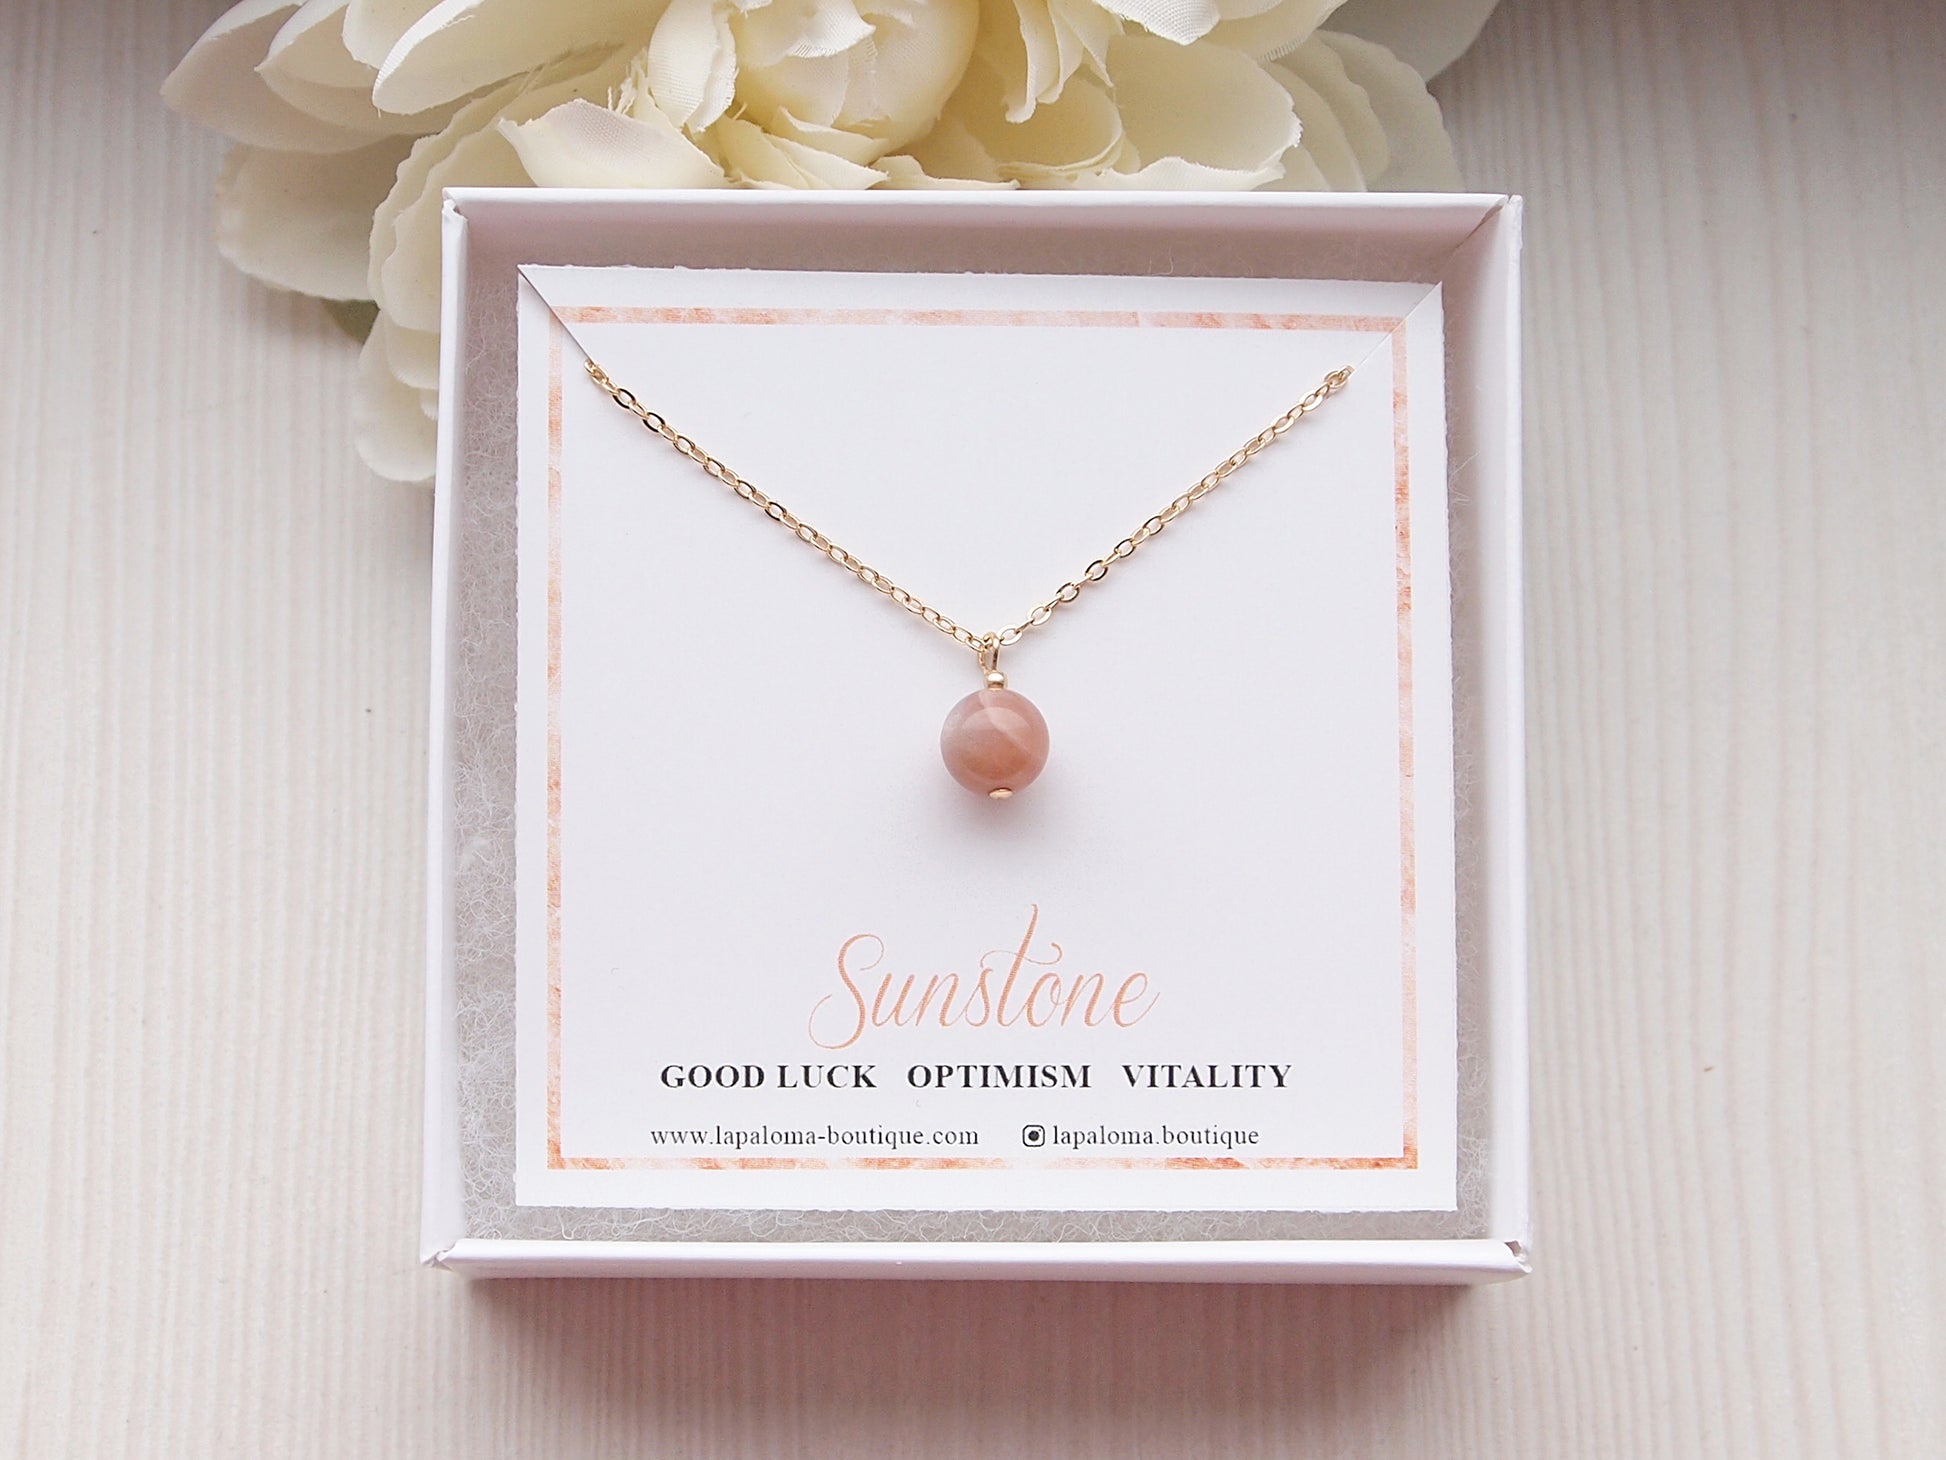 gold sunstone necklace gift, jewelry gift for her